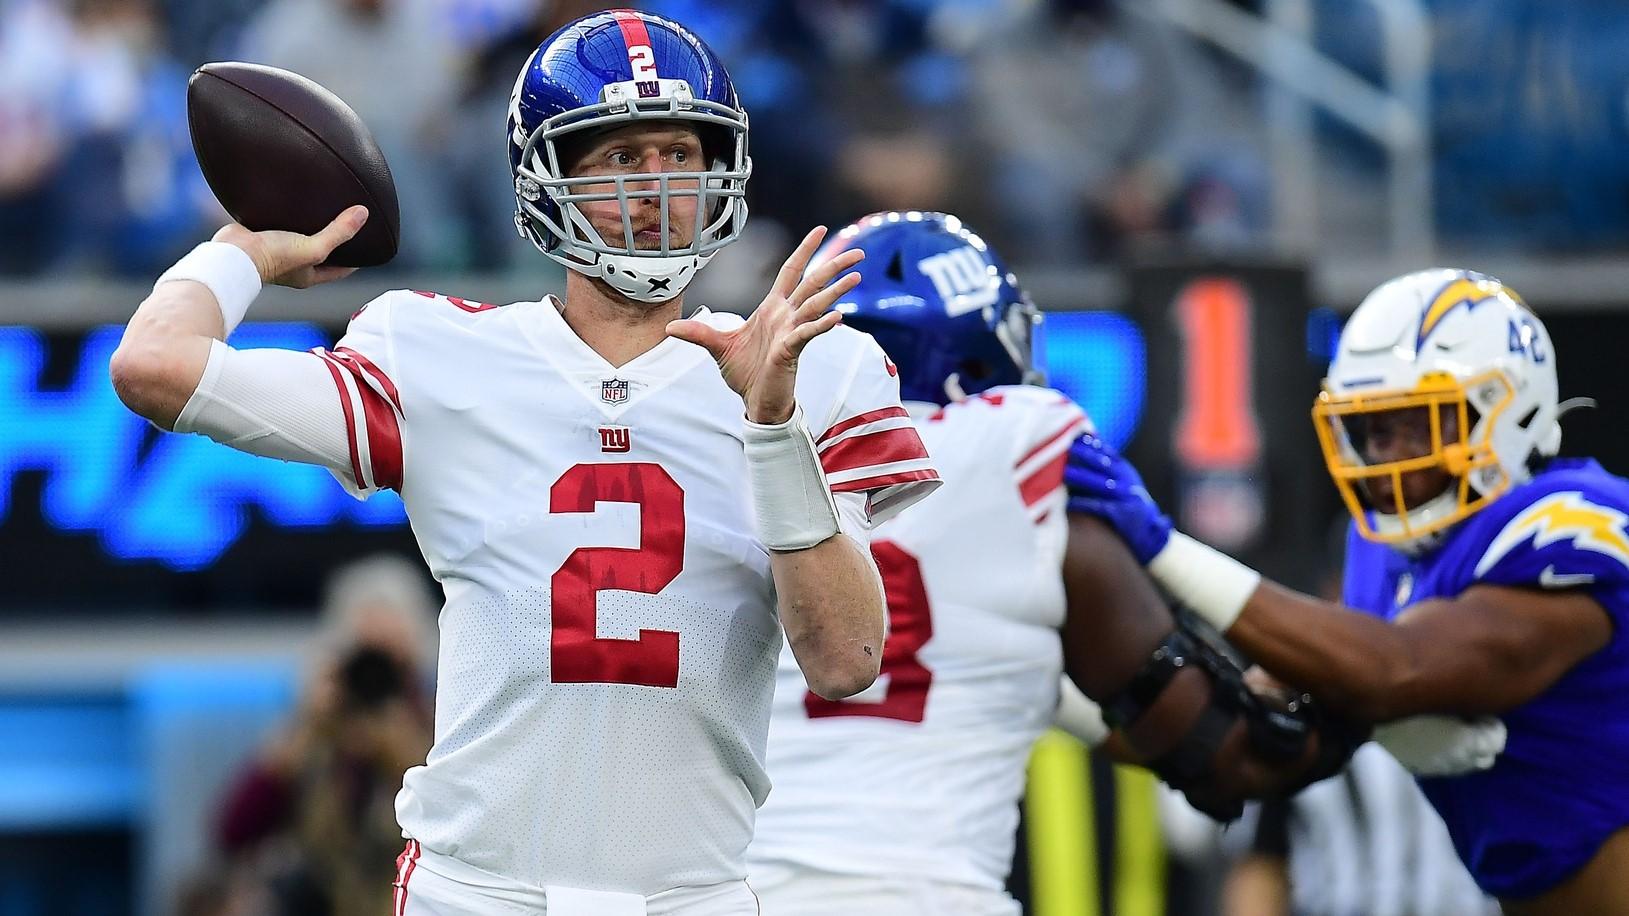 Dec 12, 2021; Inglewood, California, USA; New York Giants quarterback Mike Glennon (2) throws against the Los Angeles Chargers during the first half at SoFi Stadium. / Gary A. Vasquez-USA TODAY Sports